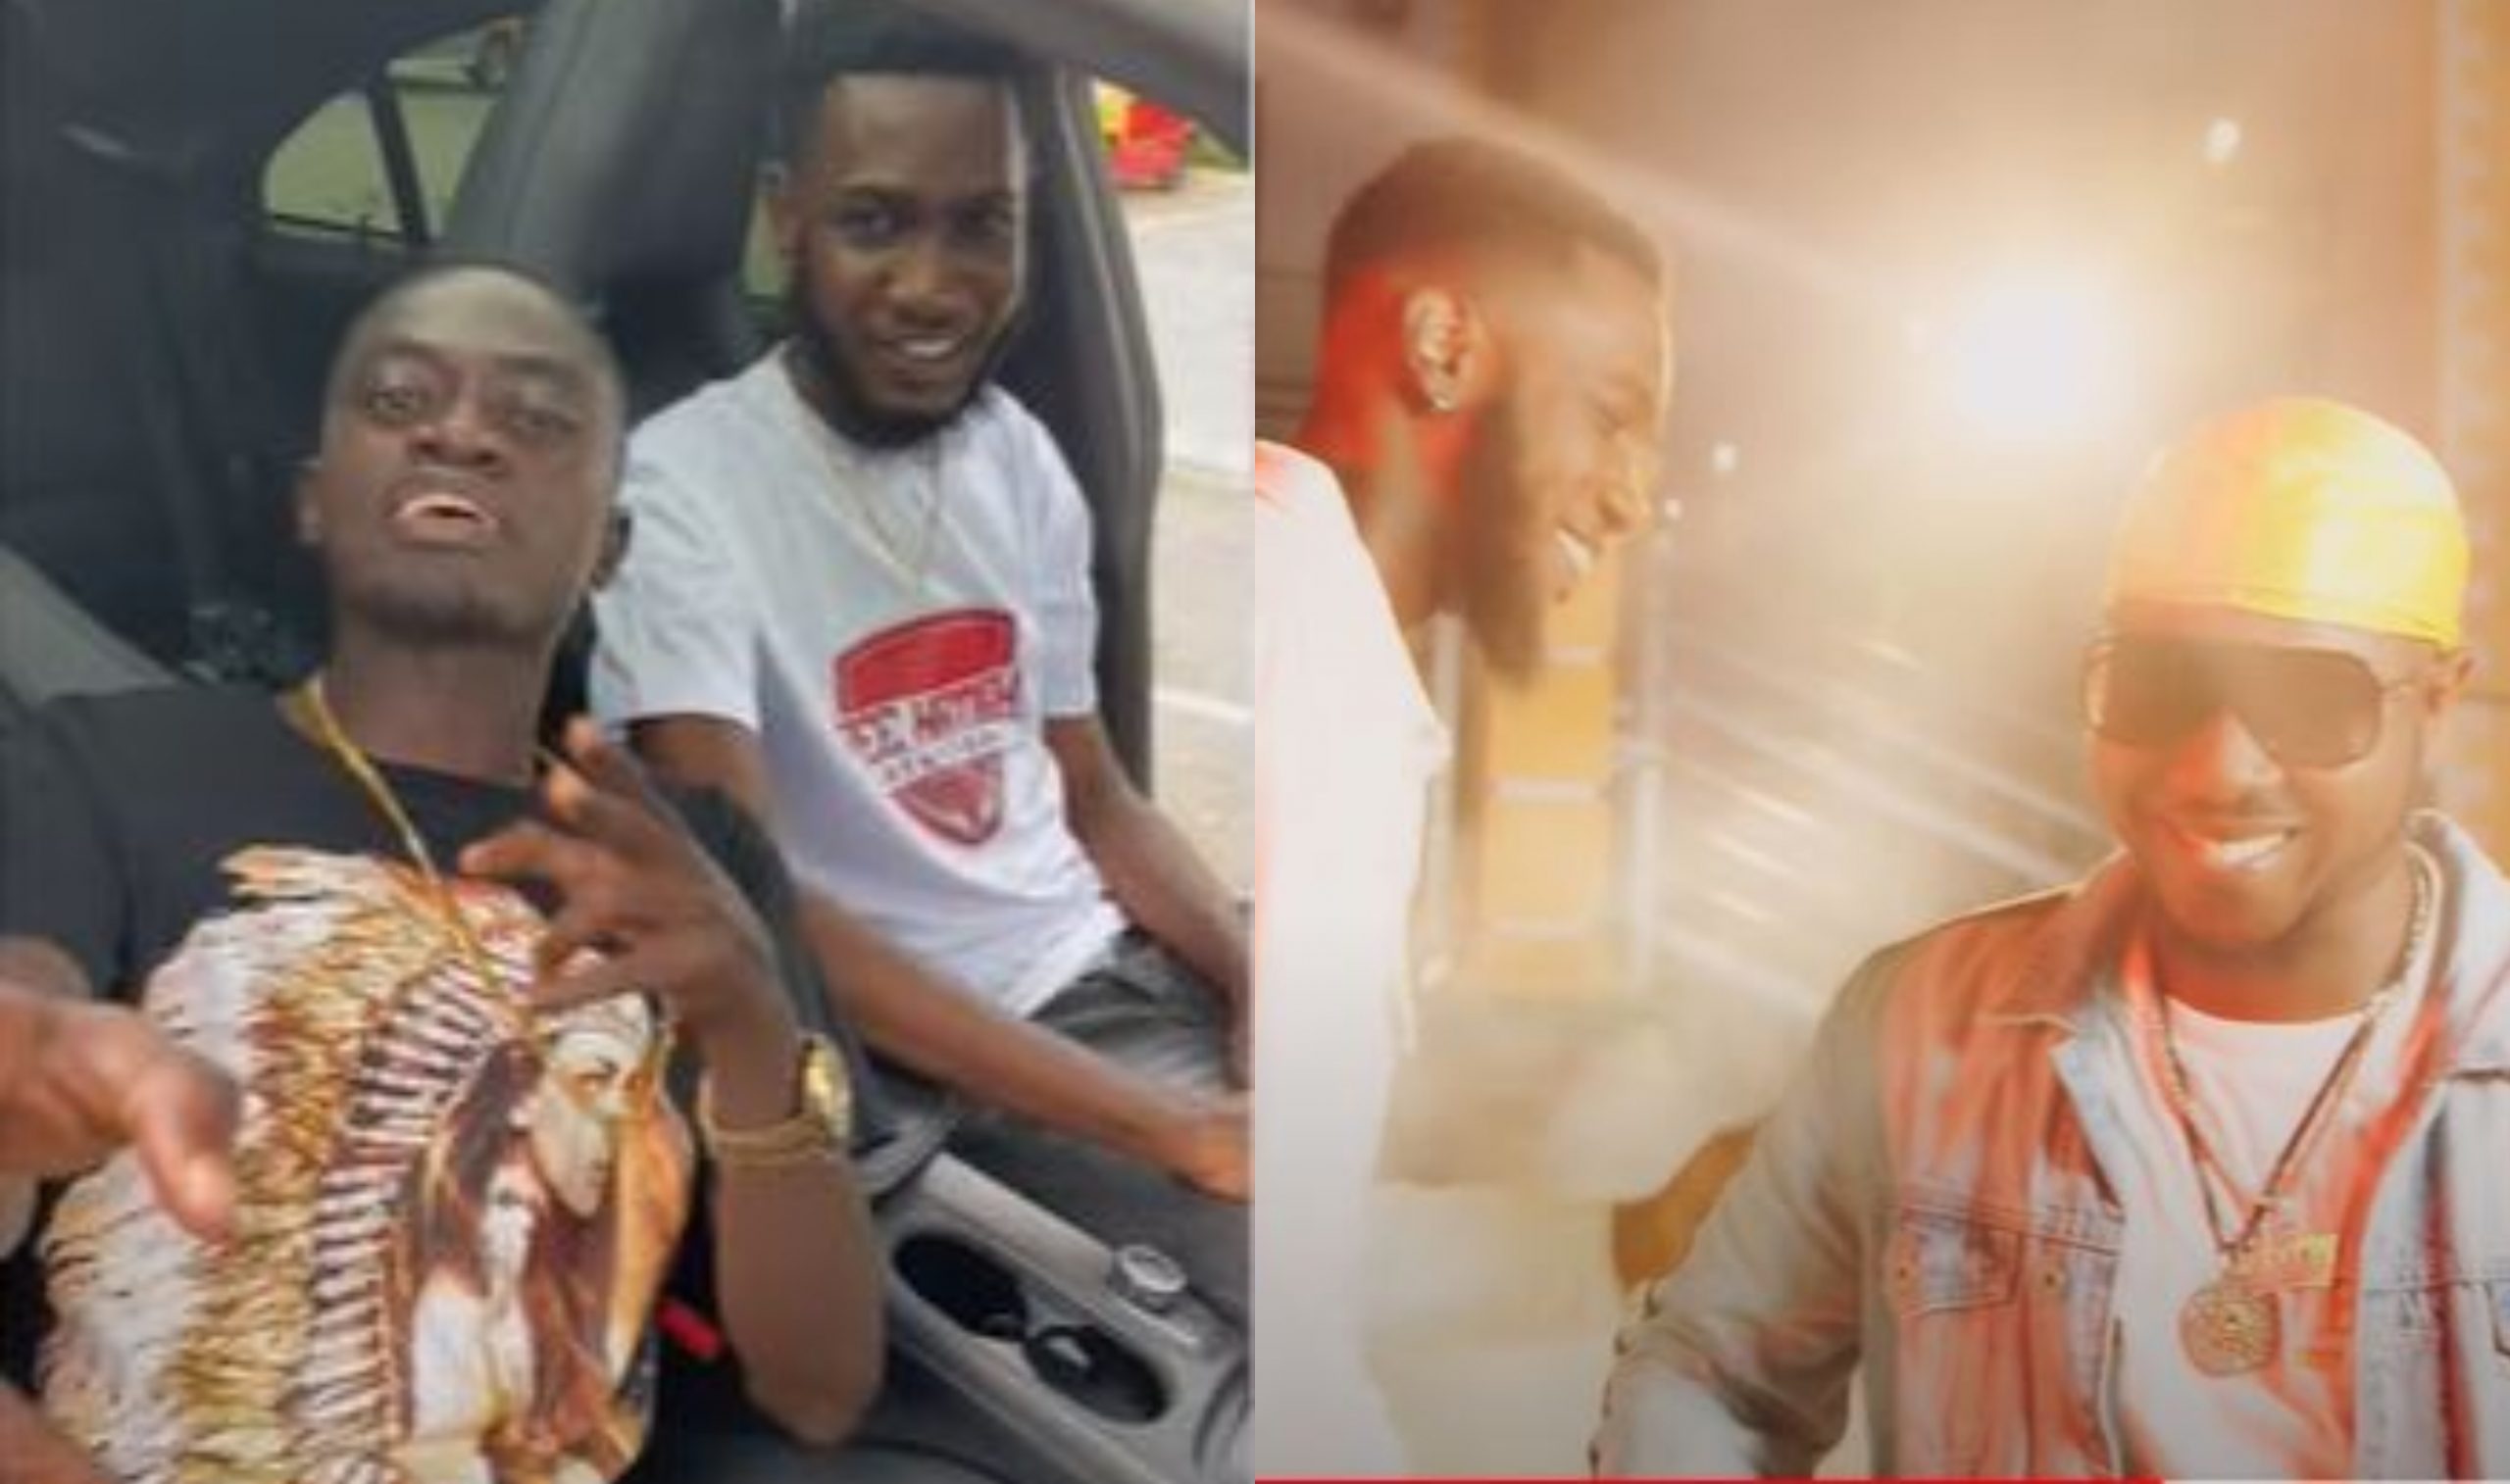 Ypee with Lil Win and Flowking Stone in Jumpin remix music video